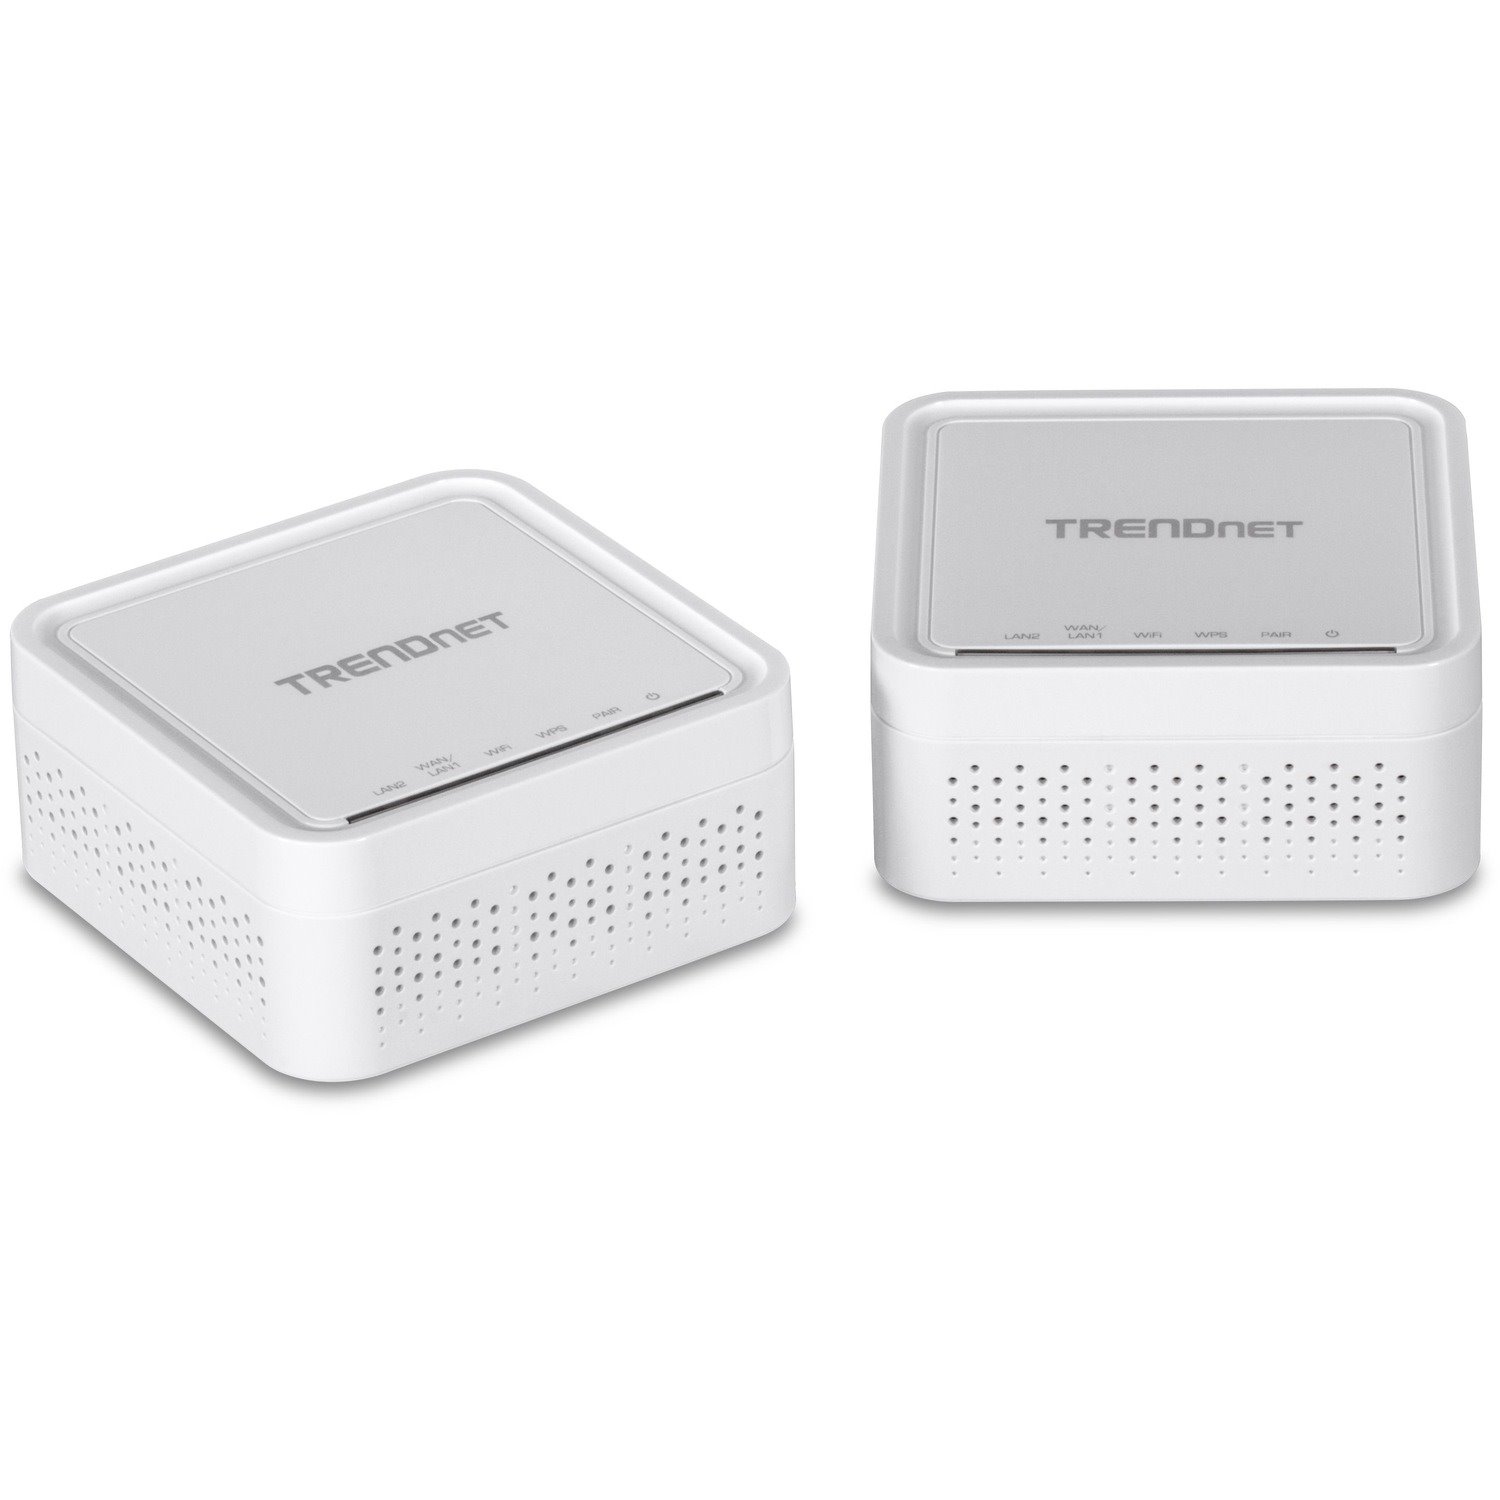 TRENDnet AC1200 WiFi EasyMesh Kit, Includes 2 x AC1200 WiFi Mesh Nodes, App-Based Setup Utility, Seamless WiFi Roaming, Beamforming, Supports 2.4GHz and 5GHz Devices, TEW-832MDR2K, White